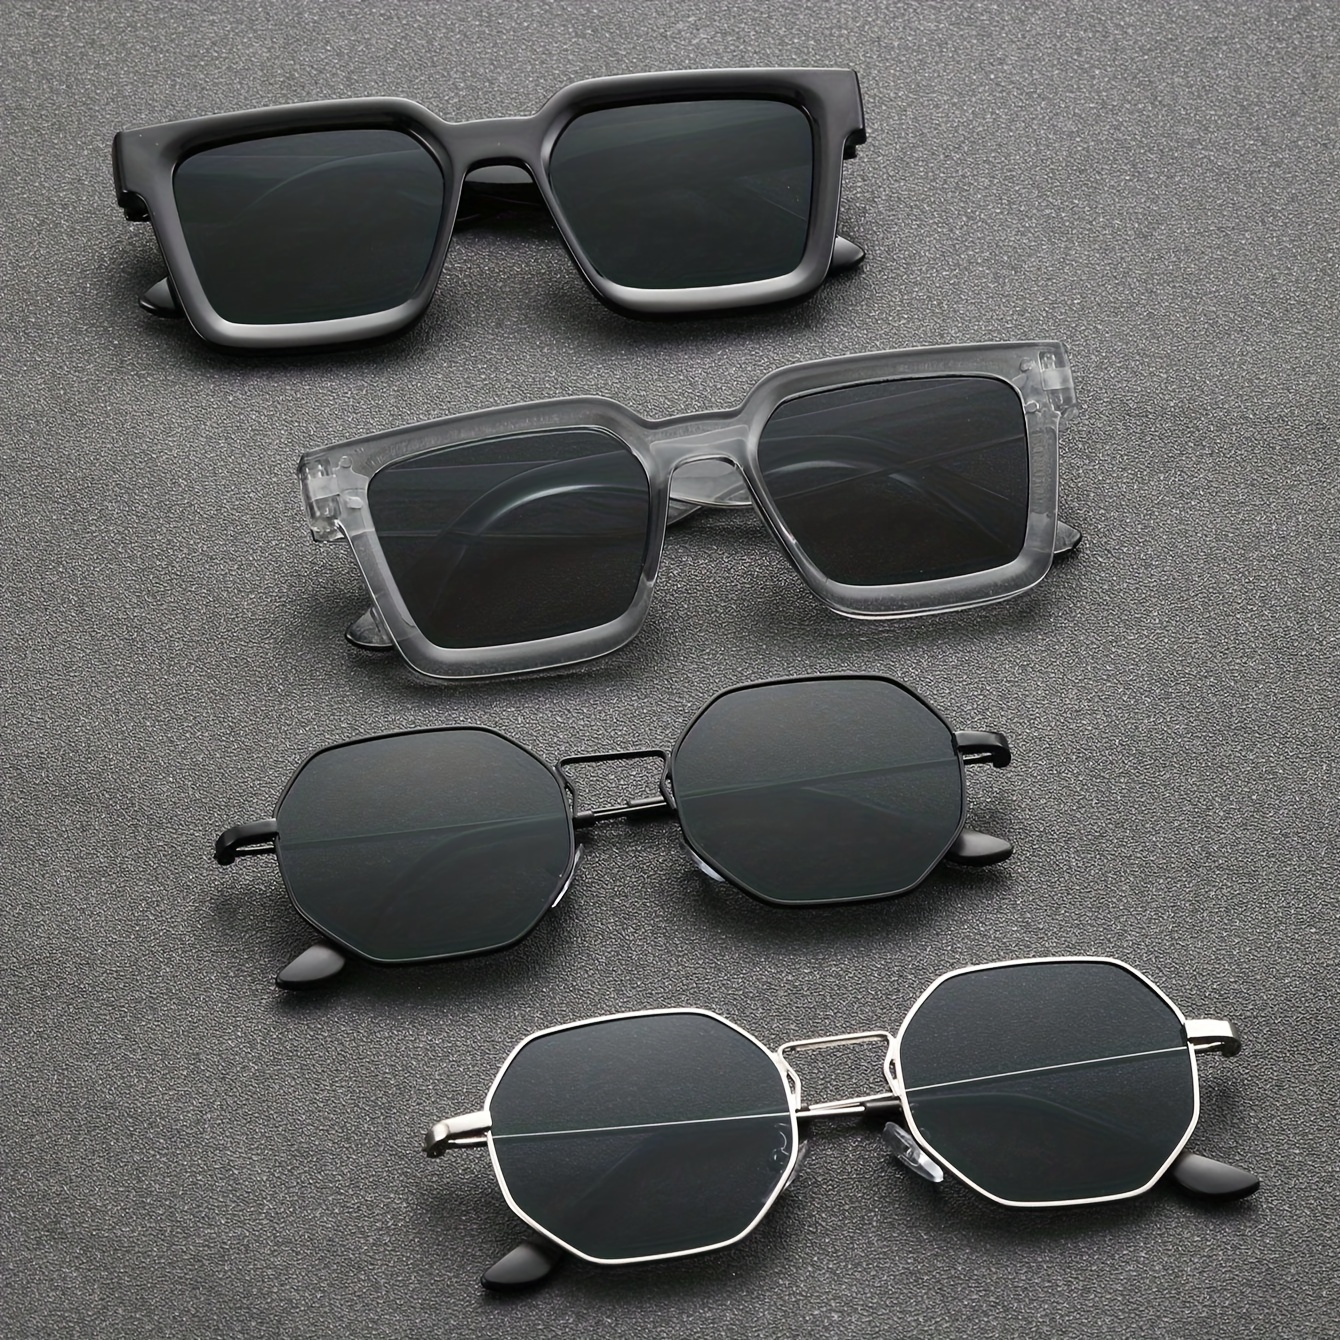 

4 Pairs Of Men's Metal Geometric Square Frame Fashion Fashion Glasses Suitable For Outdoor Leisure, Handsome And Versatile Shooting Accessories